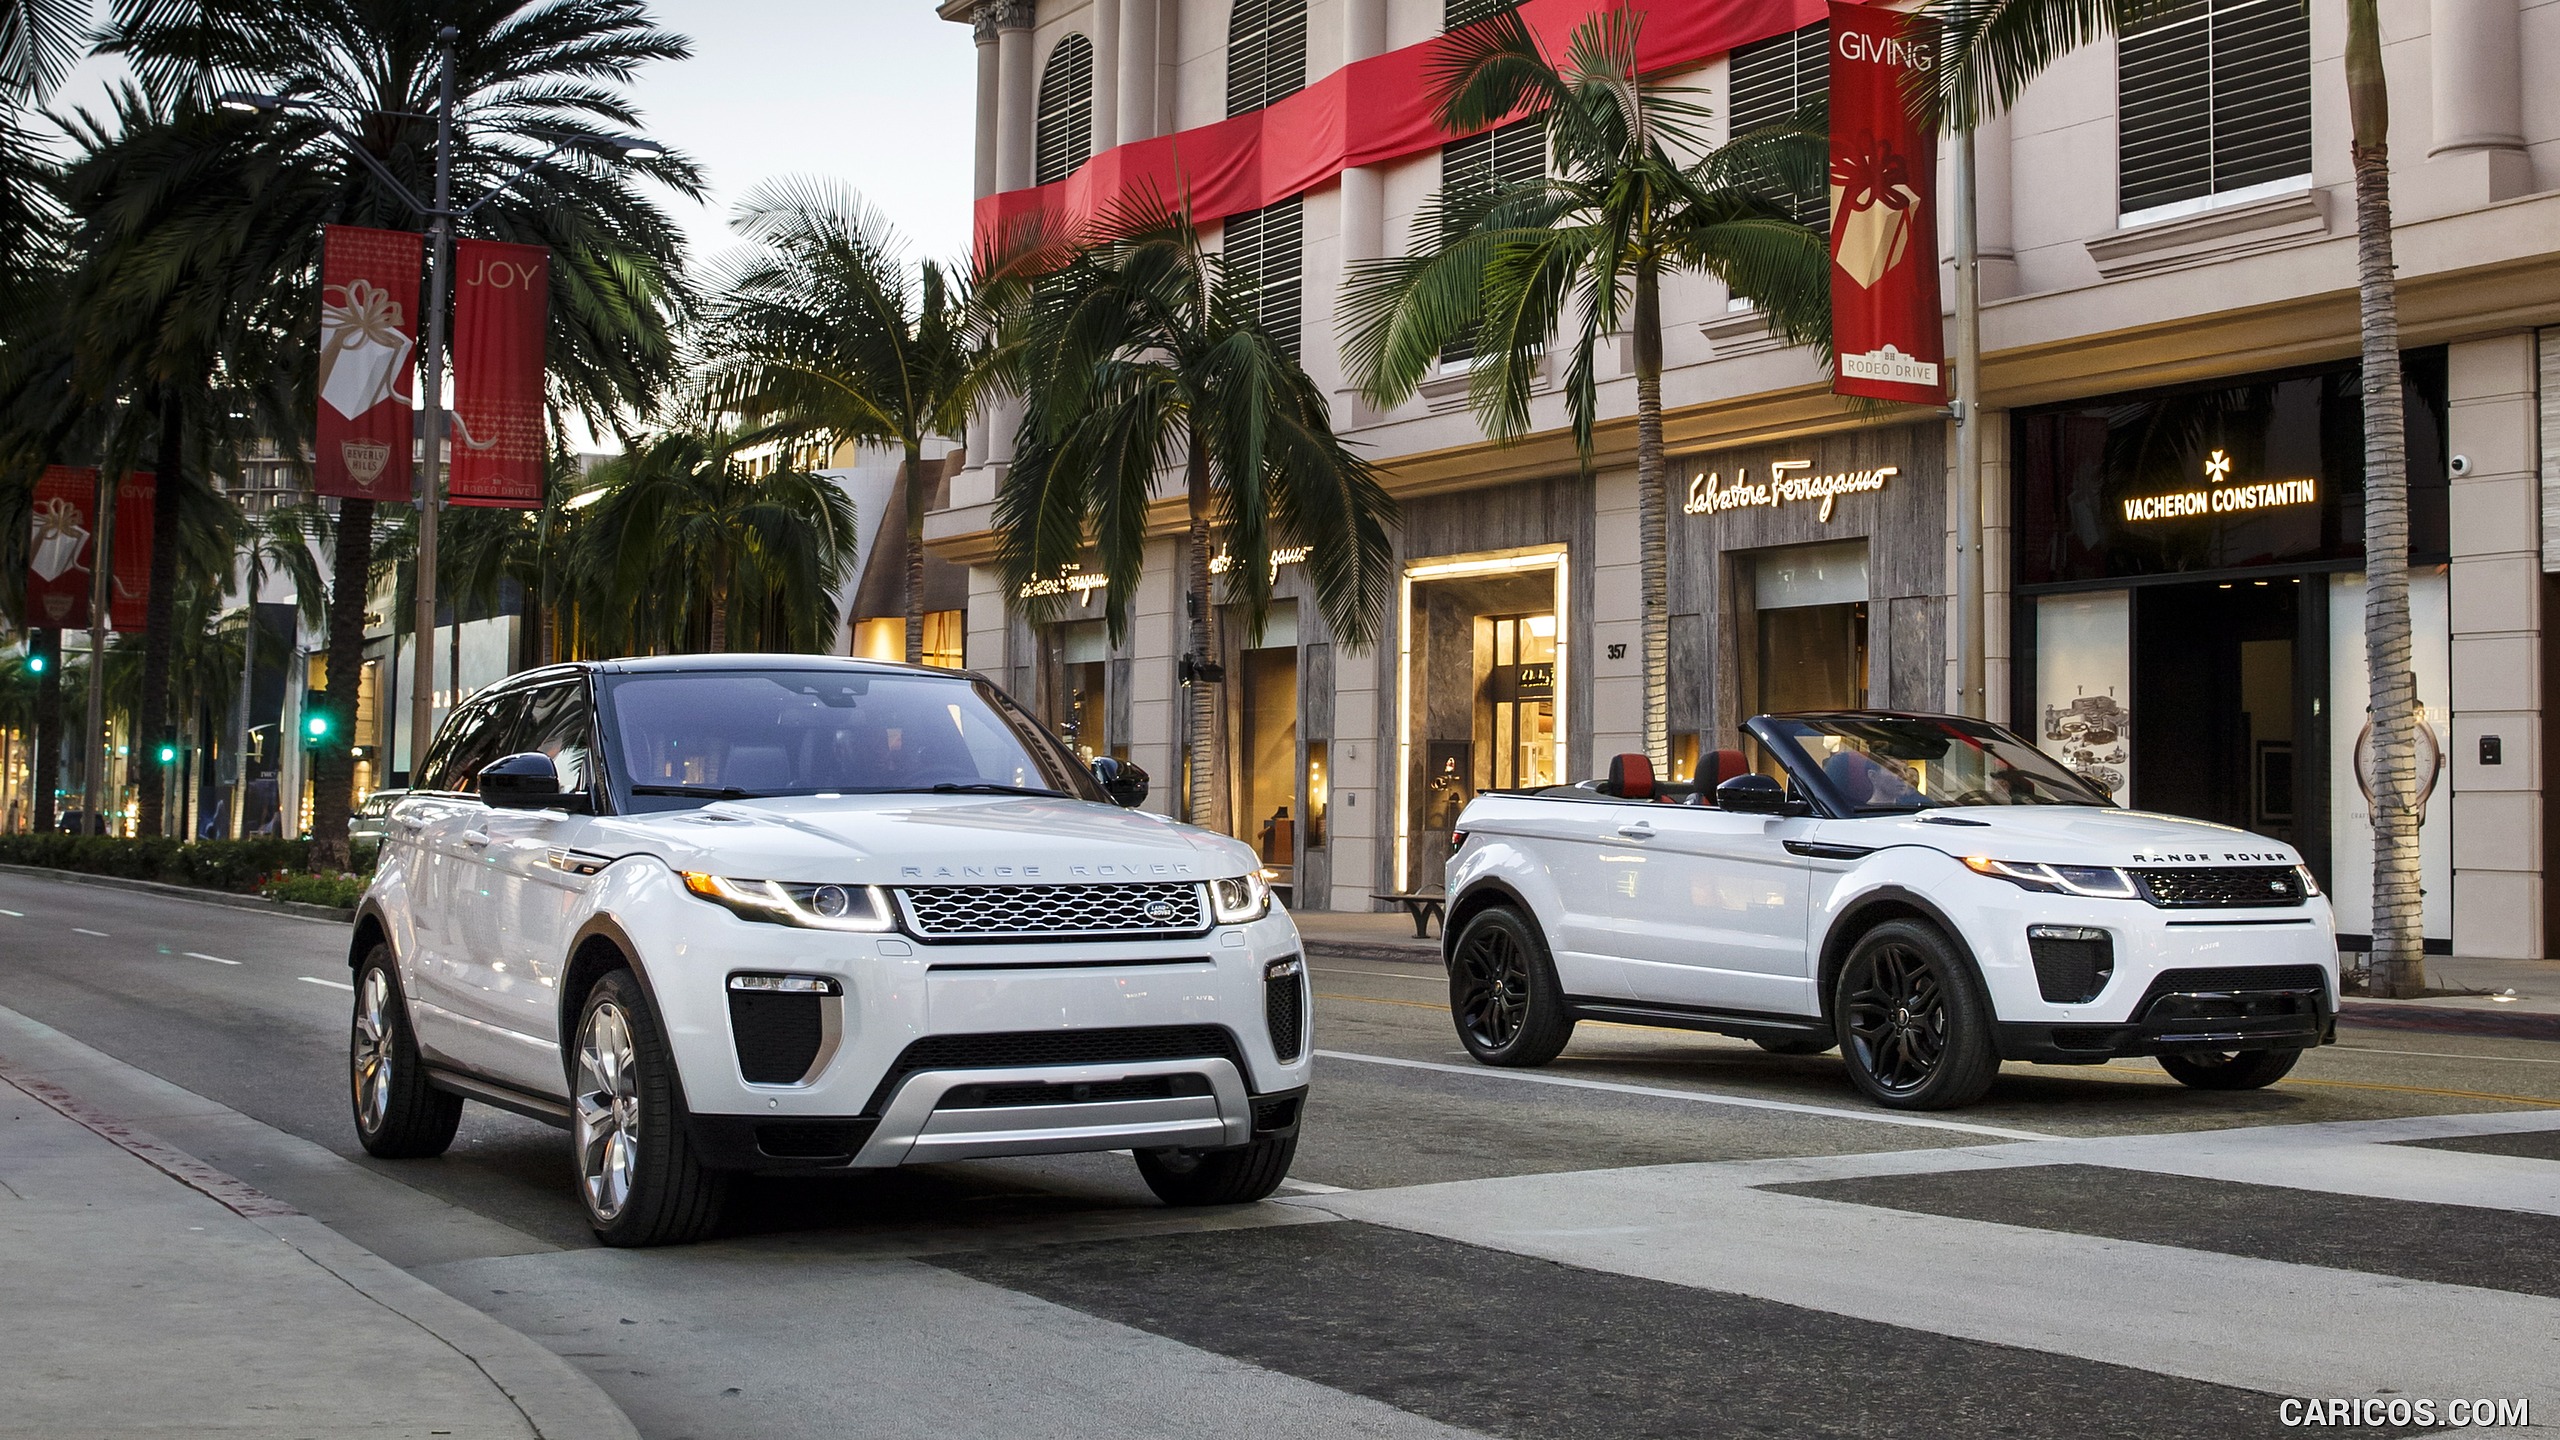 Range Rover Evoque Convertible In Beverly Hills Front HD